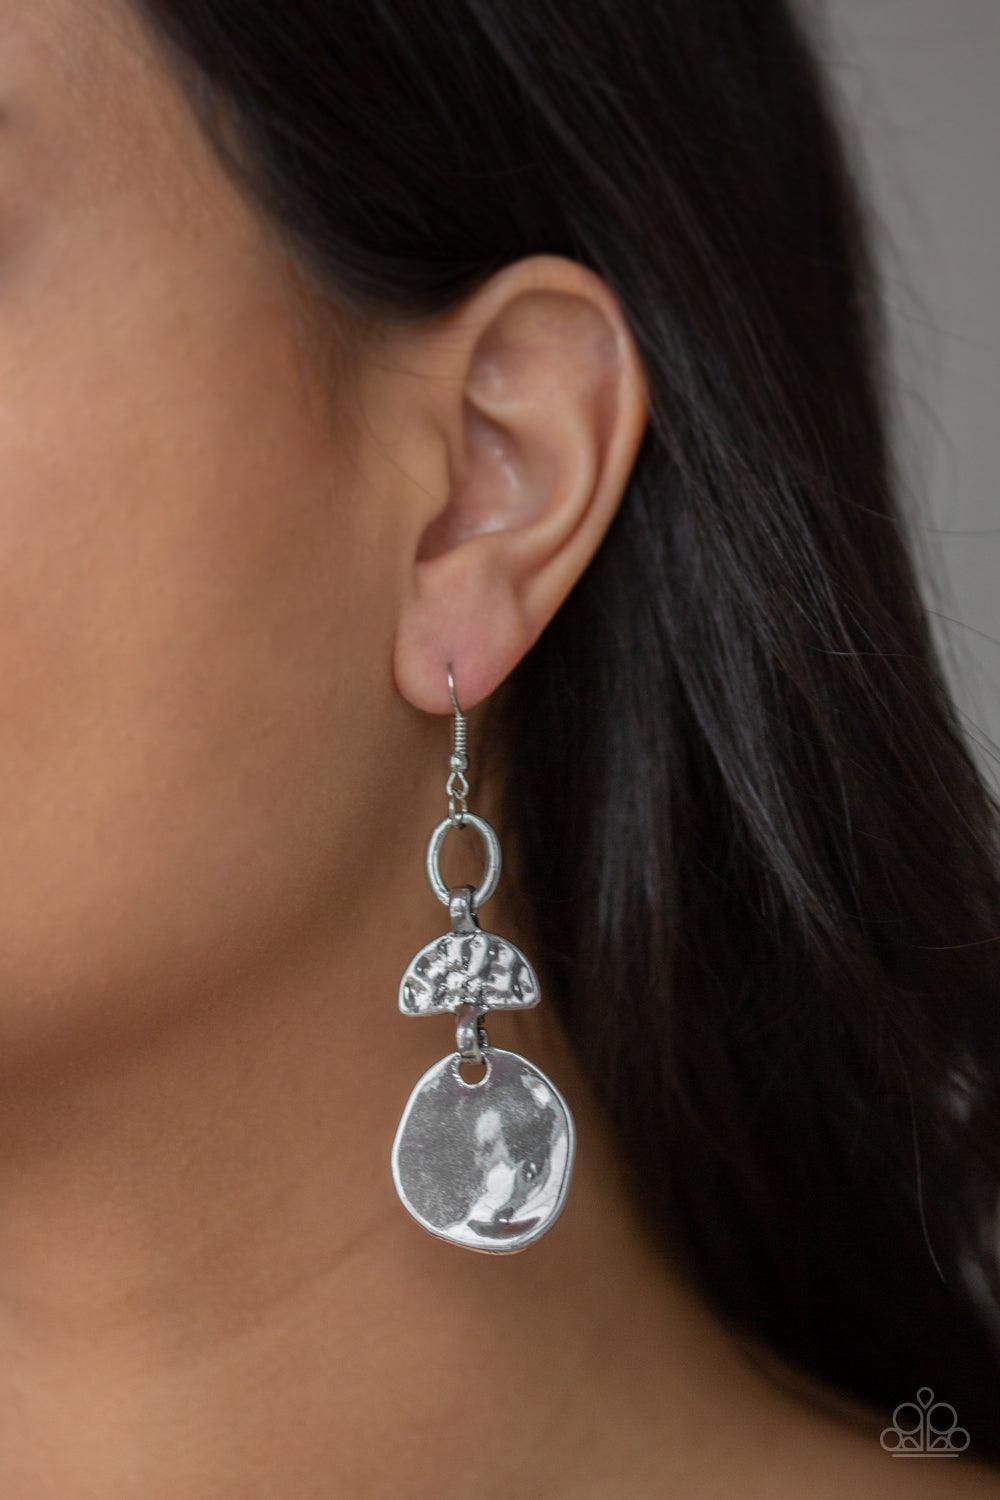 Paparazzi Accessories-Melting Pot - Silver Earrings